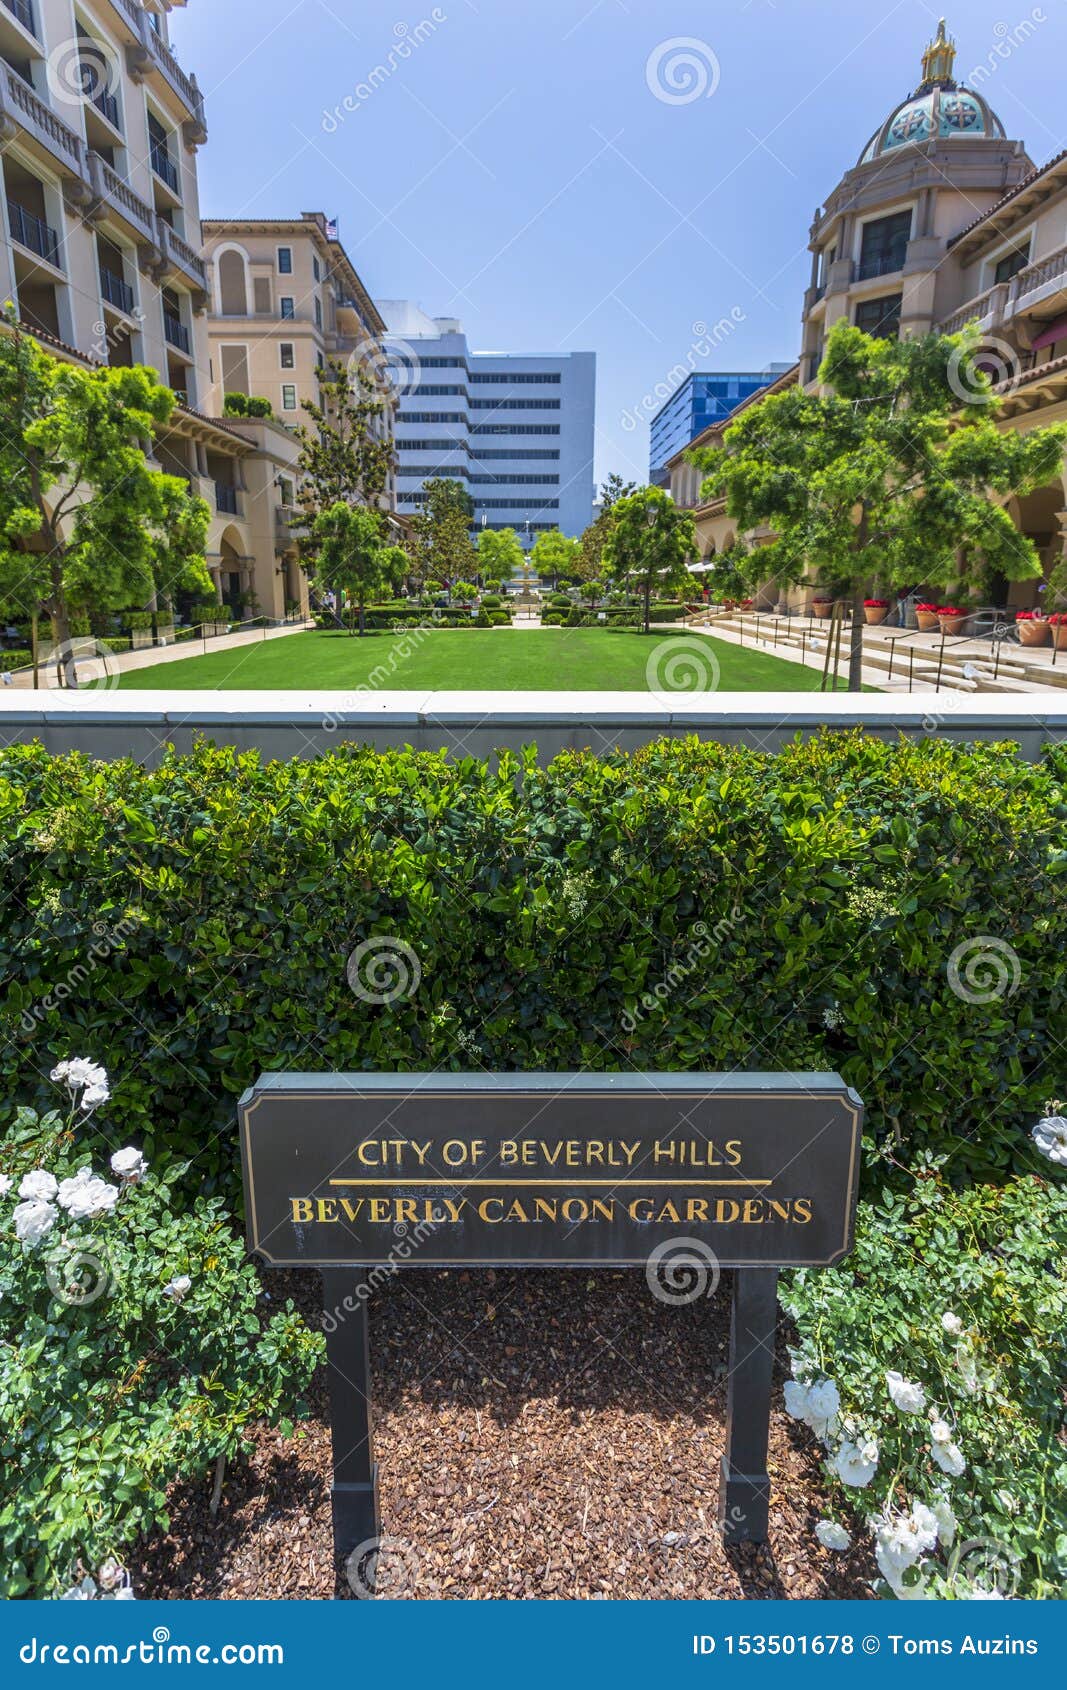 Beverly Canon Gardens Beverly Hills Los Angeles California